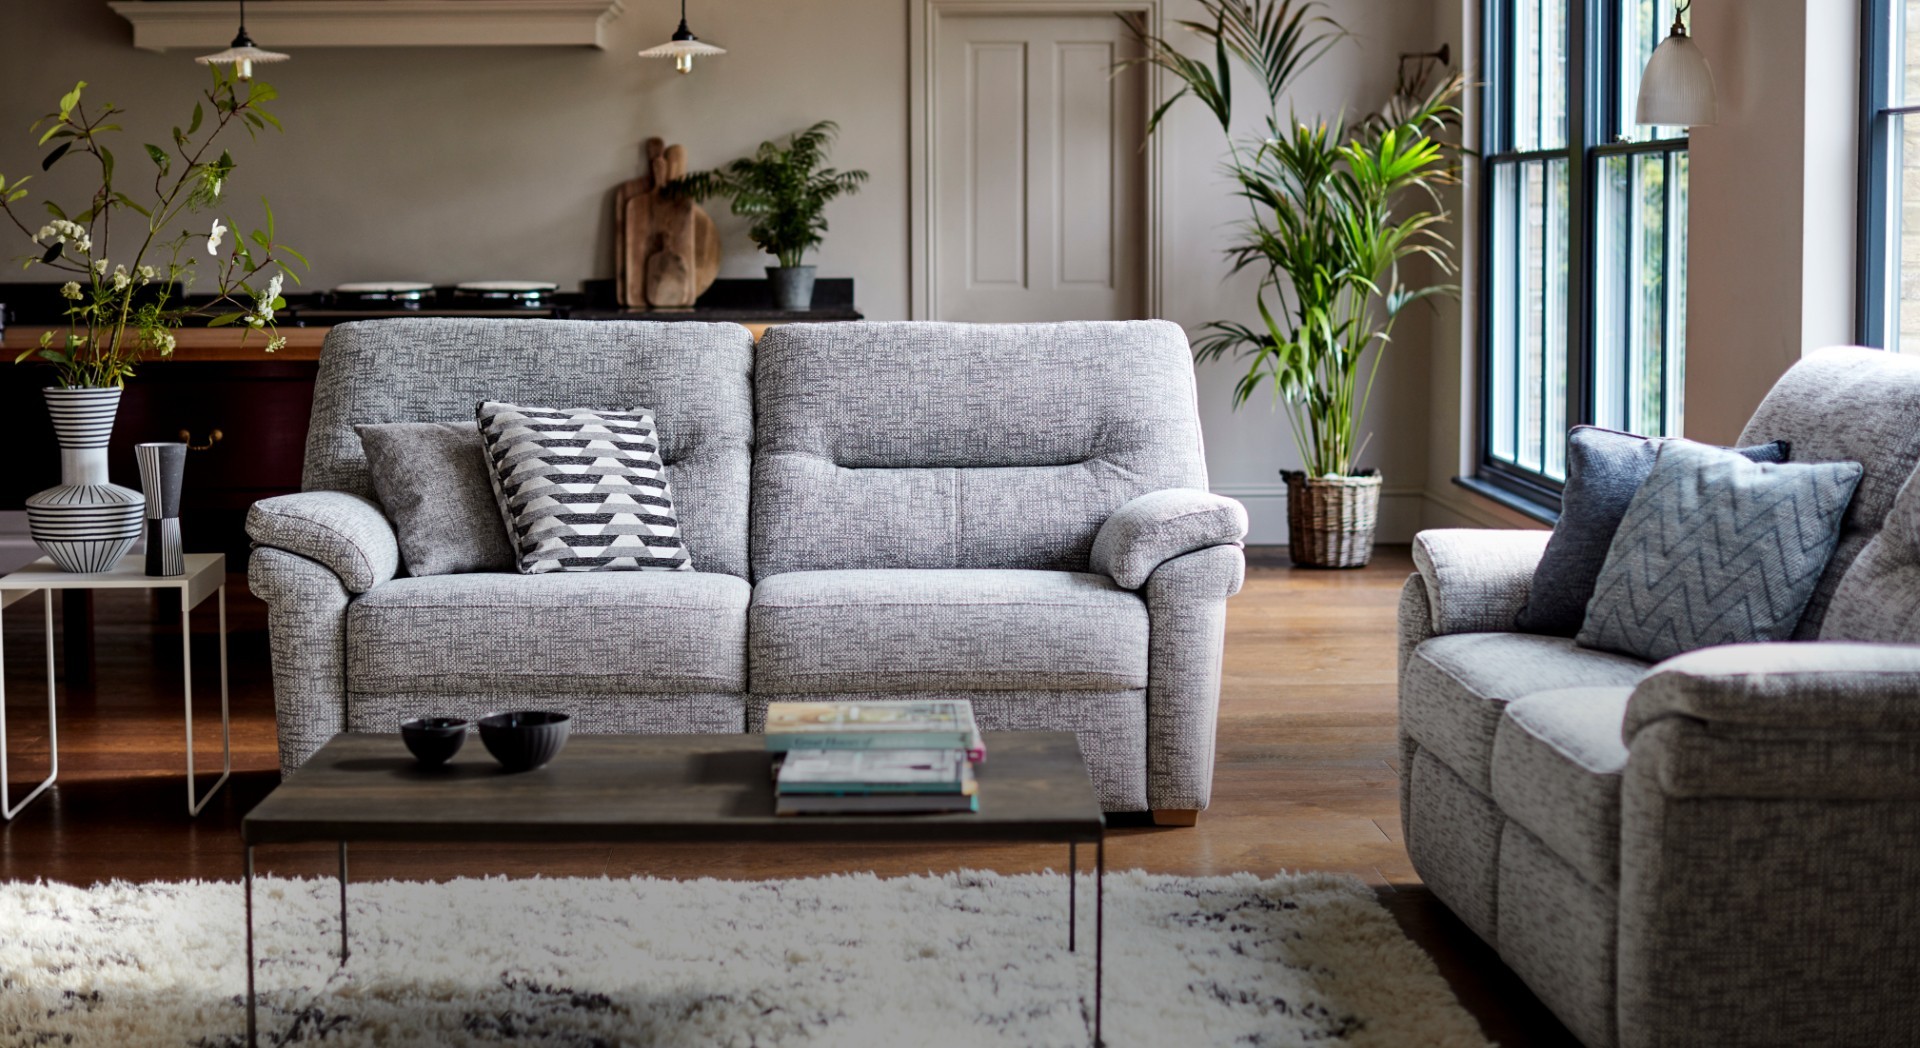 Browse all of our sofas & chairs, as well as footstool and other accessories.